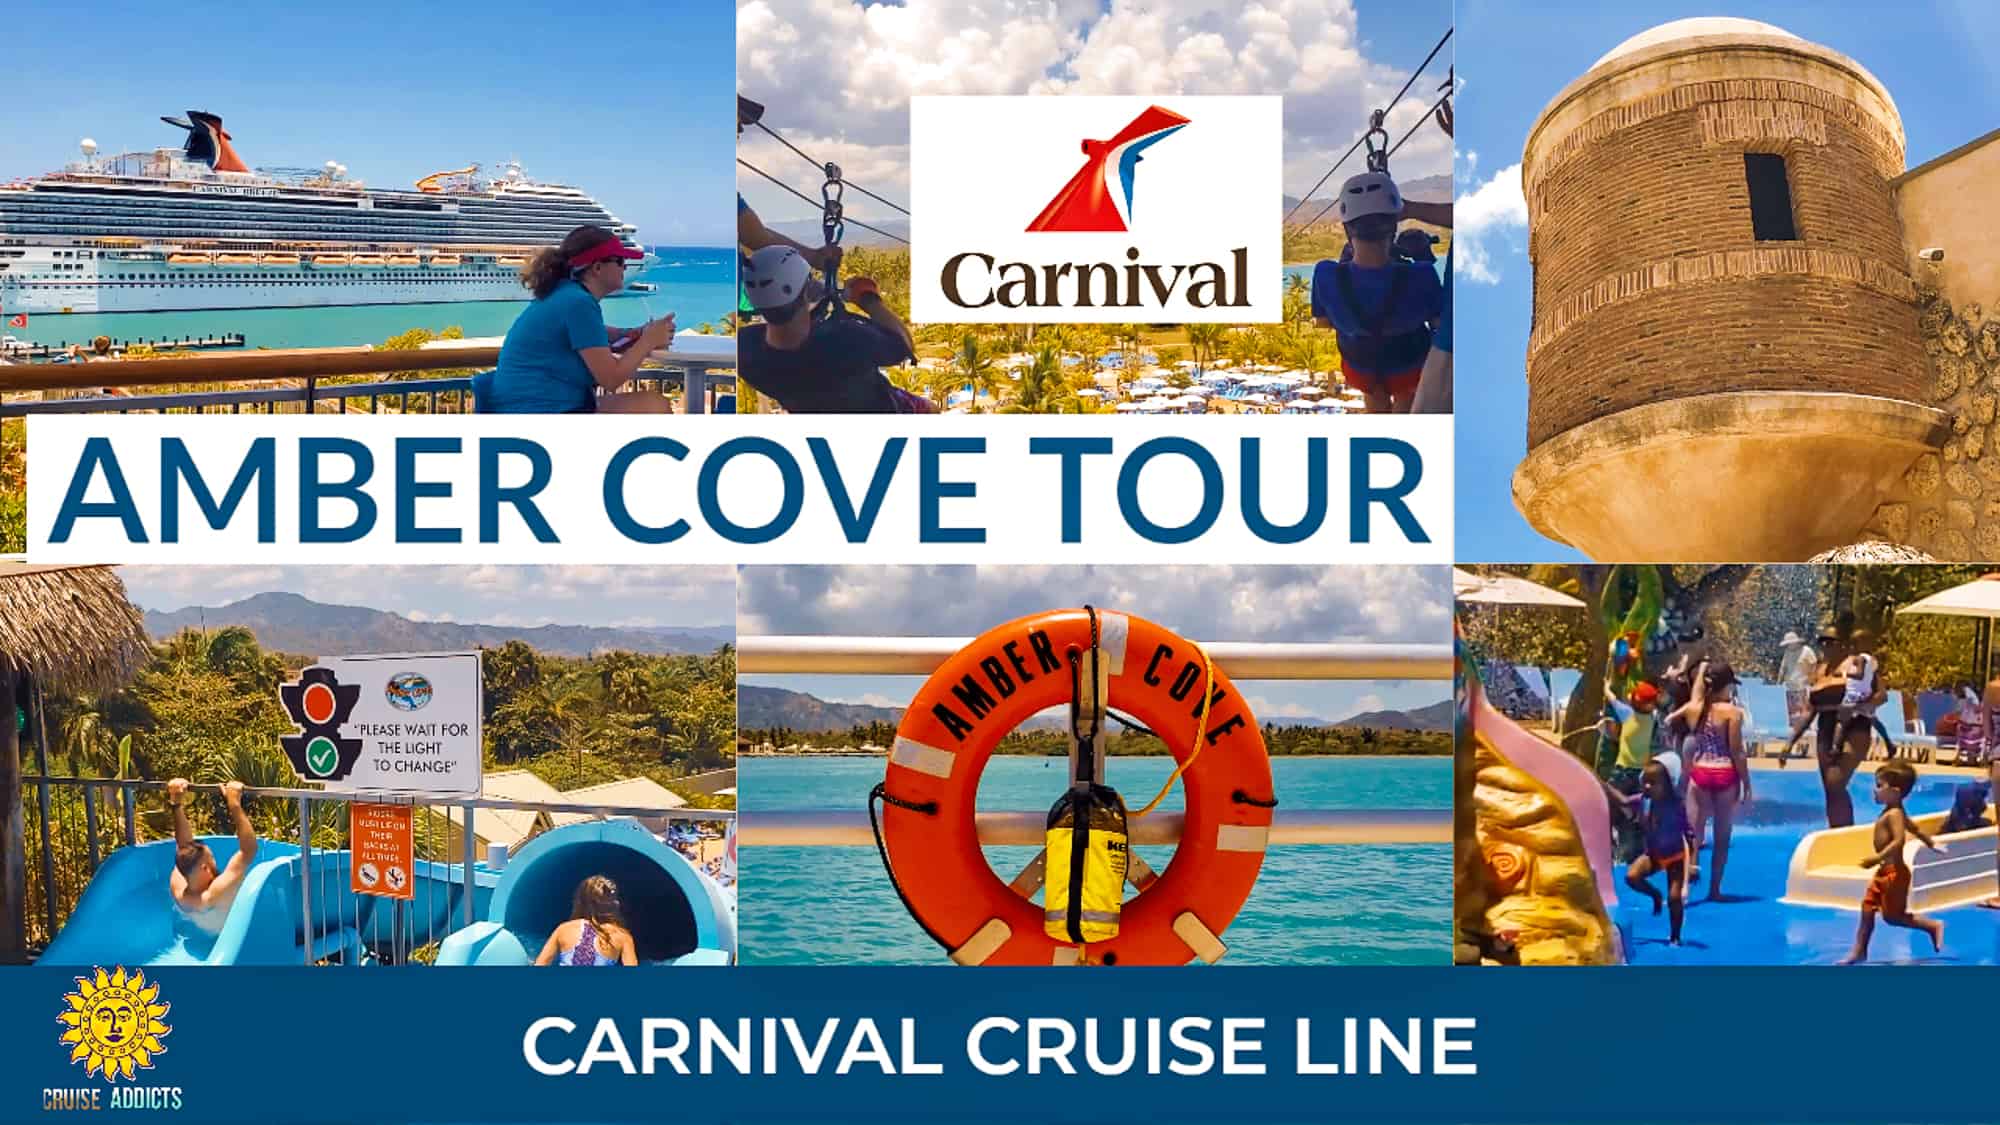 excursions from carnival cruises